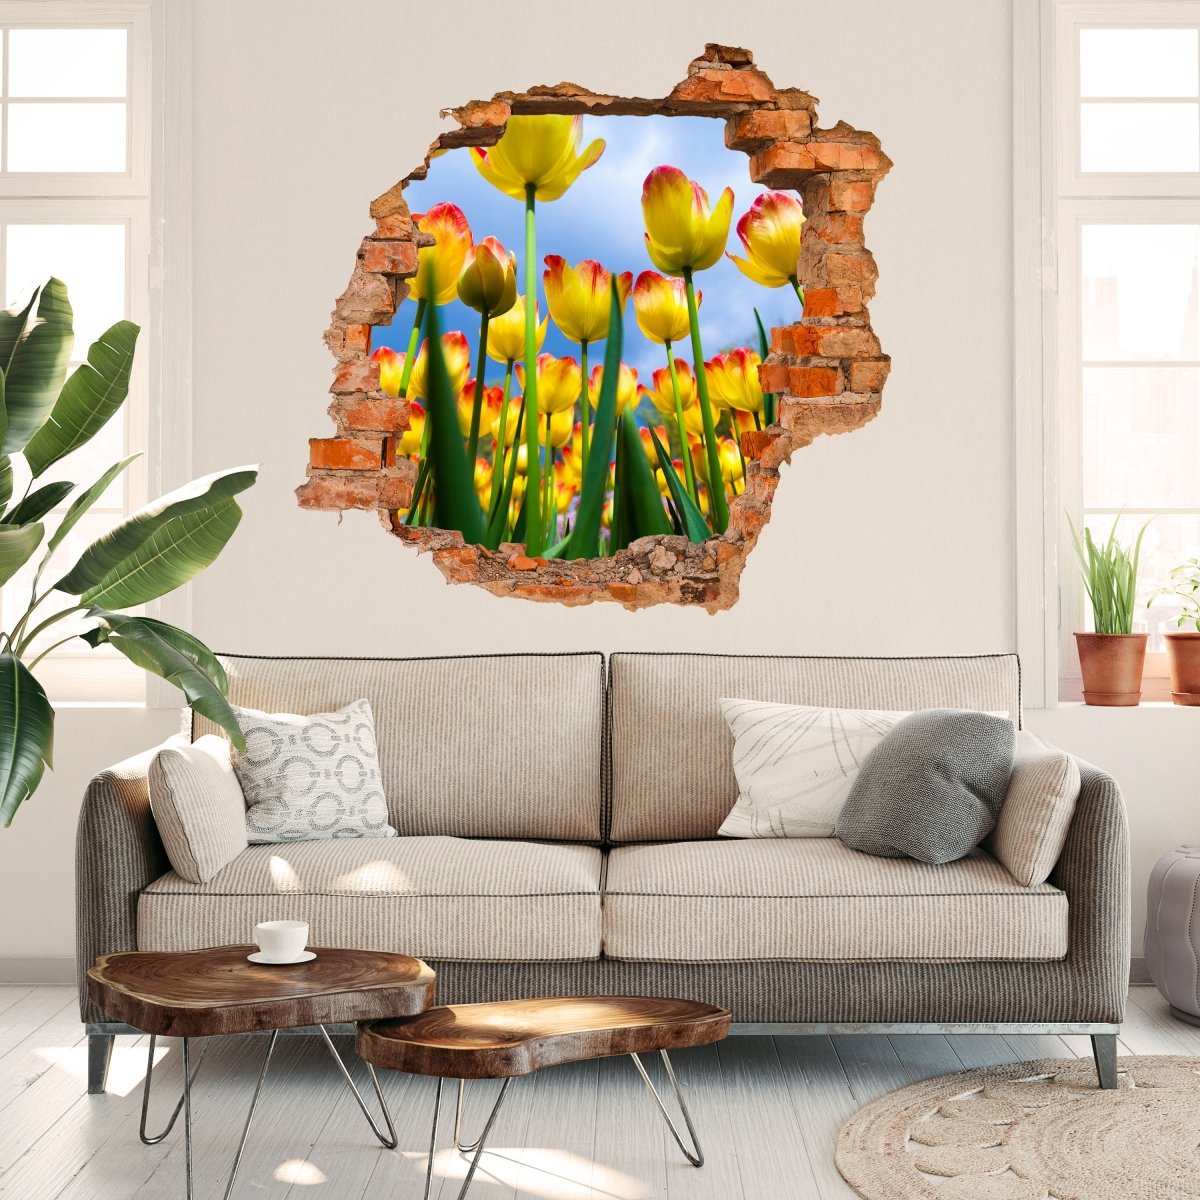 3D wall sticker tulips - Wall Decal M1029